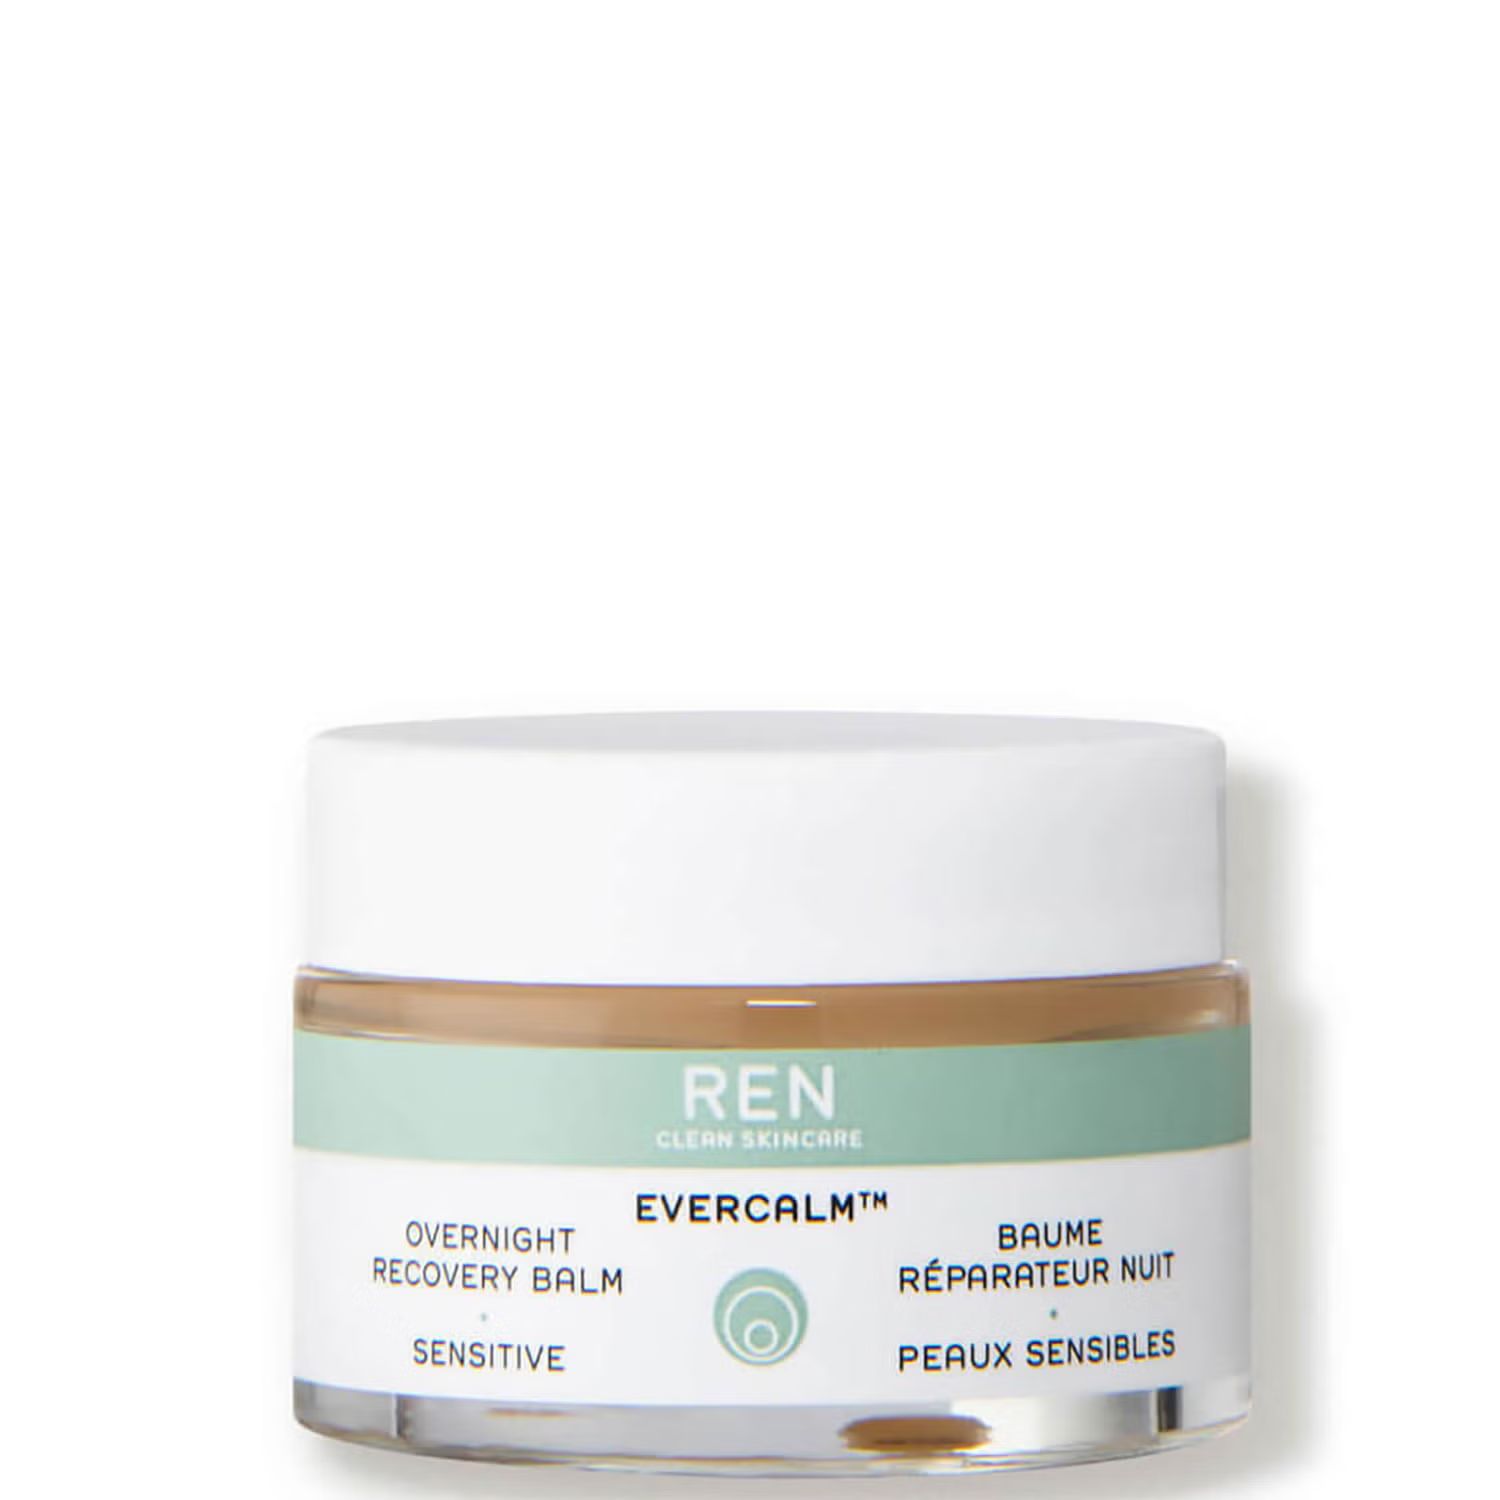 REN Clean Skincare - Evercalm Overnight Recovery Balm 30ml | Cult Beauty